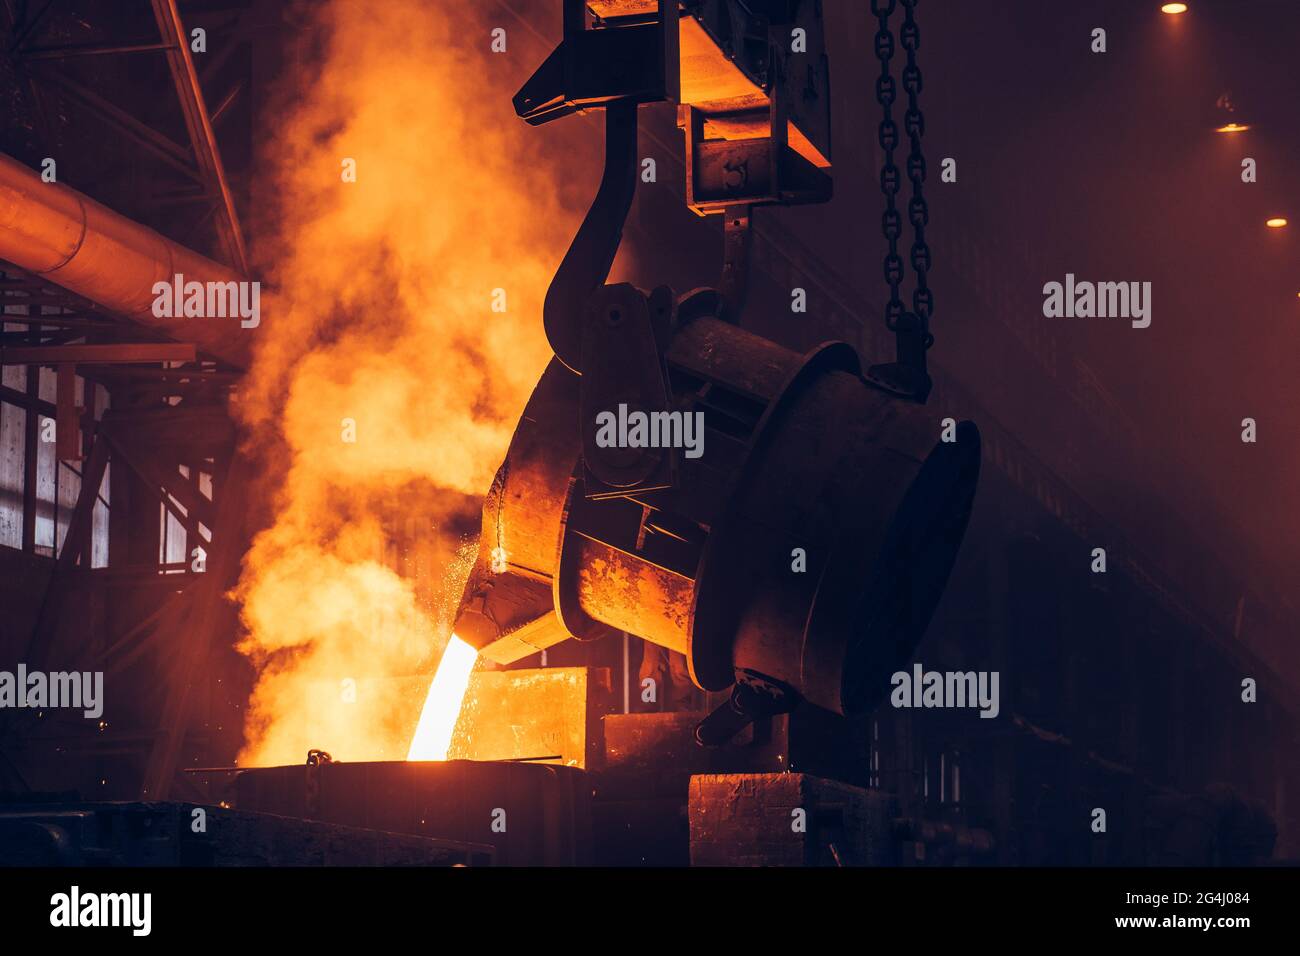 Molten metal casting. Pouring iron with smoke and sparks. Metallurgical plant. Steel production. Foundry blast furnace. Stock Photo